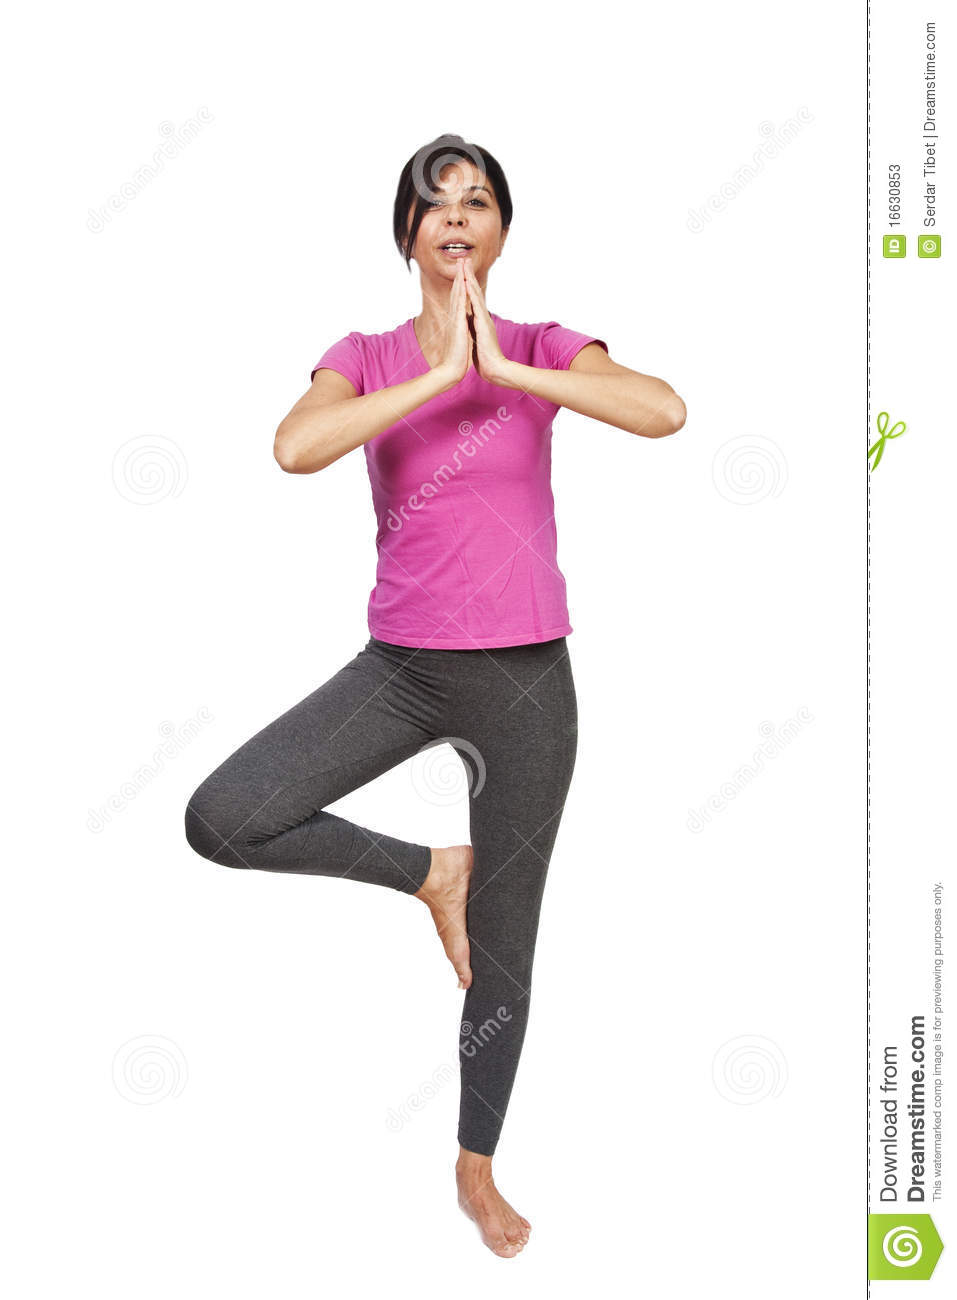 Fitness Instructor Posing An Exercise On Single Foot Isolated On